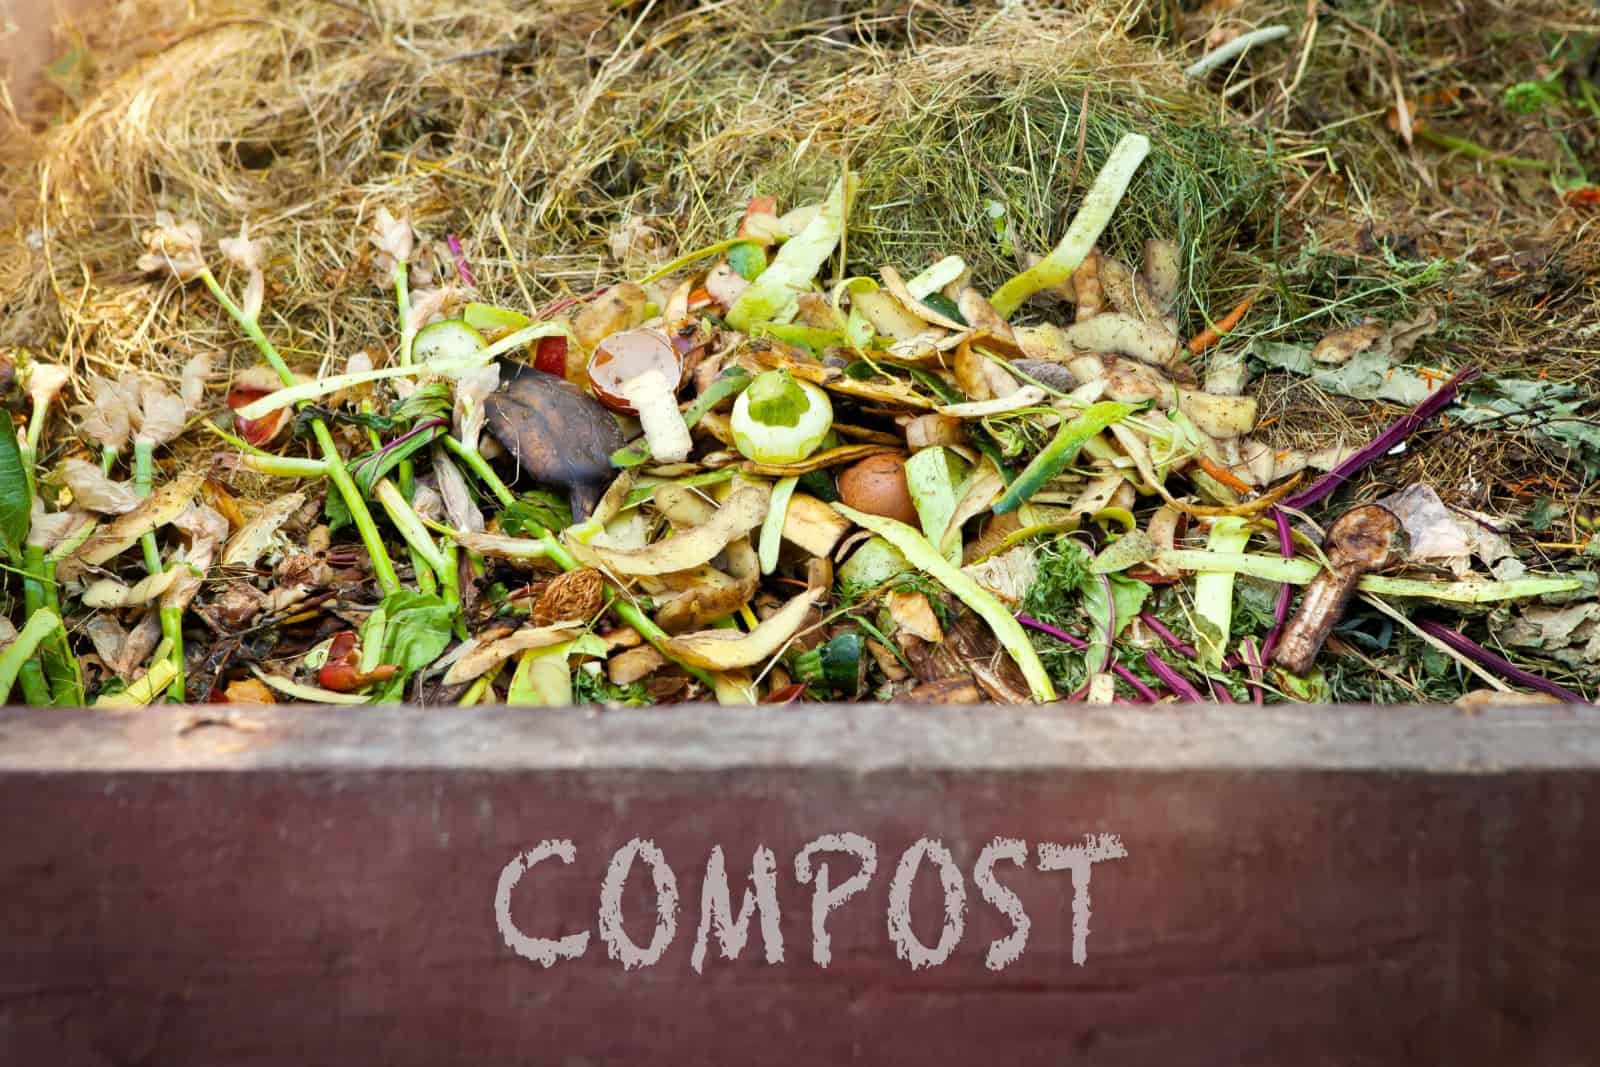 Compost - text on the front of a compost bin with food scraps and grass clippings.